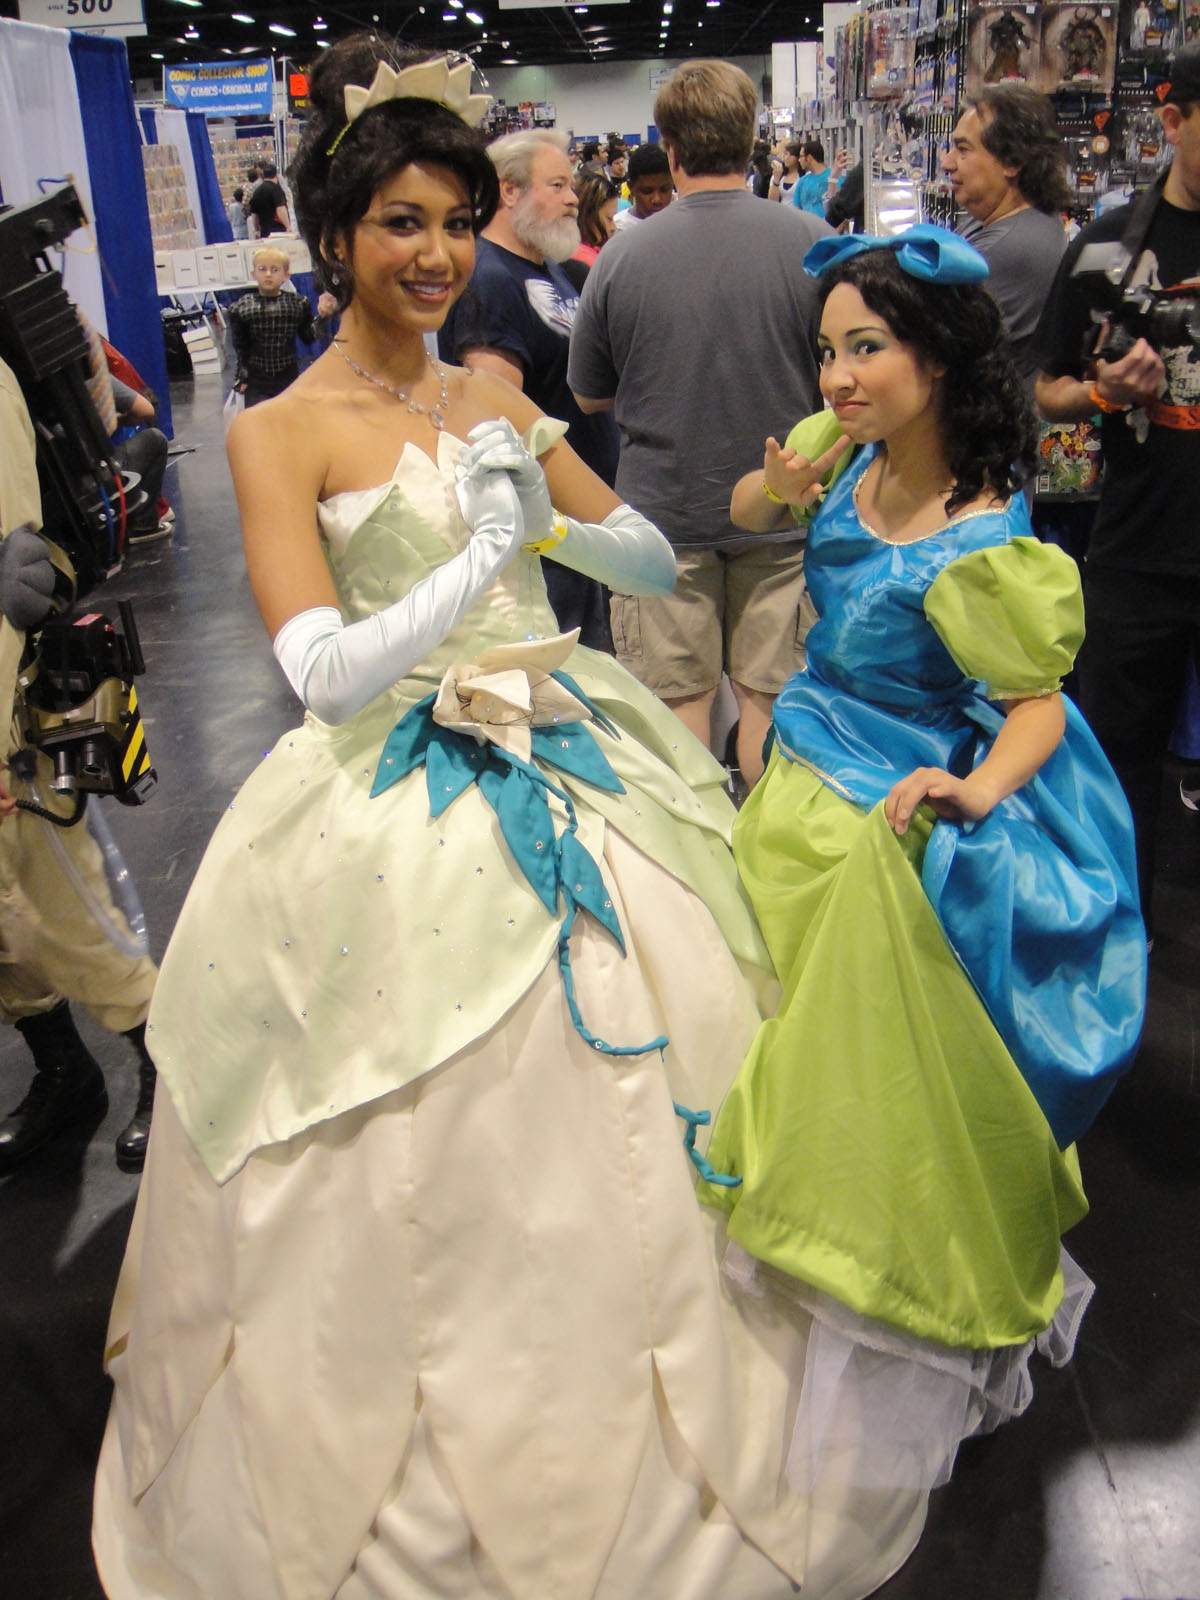 two women dressed in princess dresses look at each other